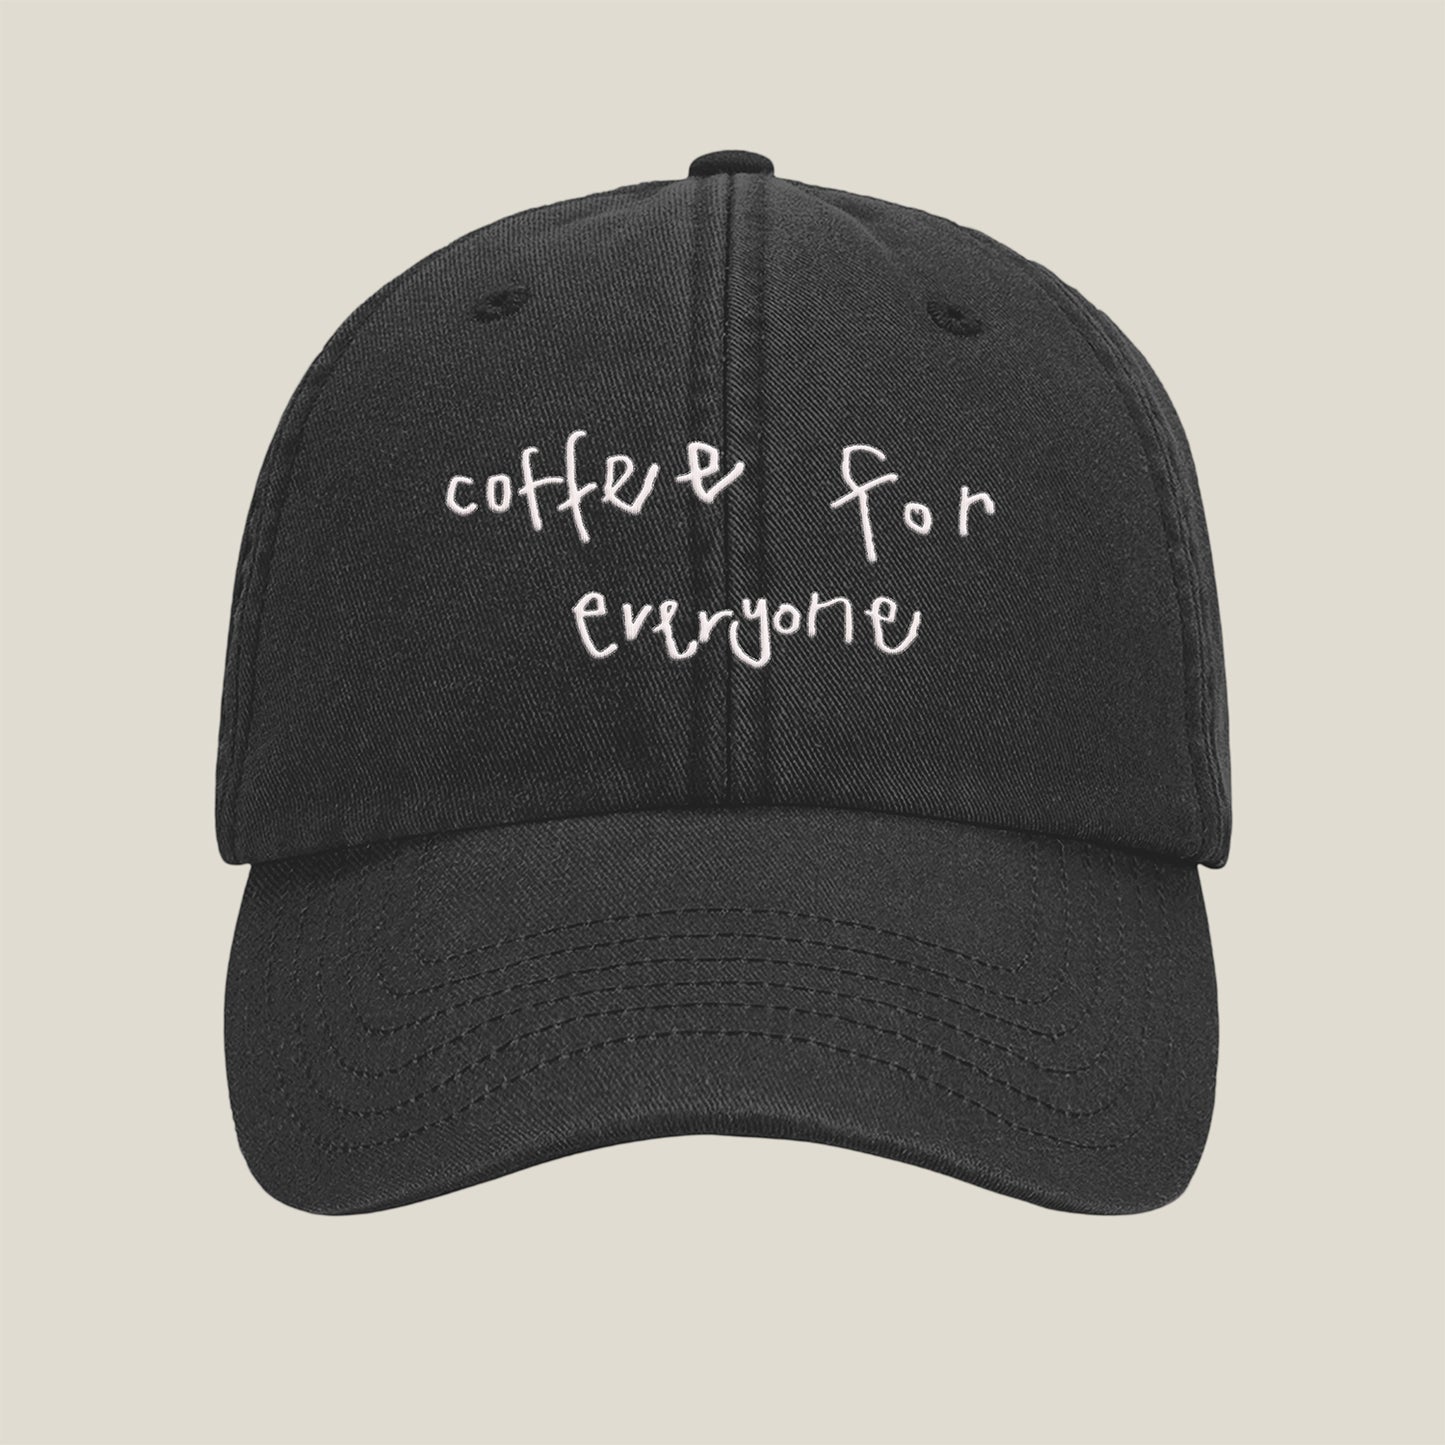 "Coffee For Everyone" Embroidered Cap